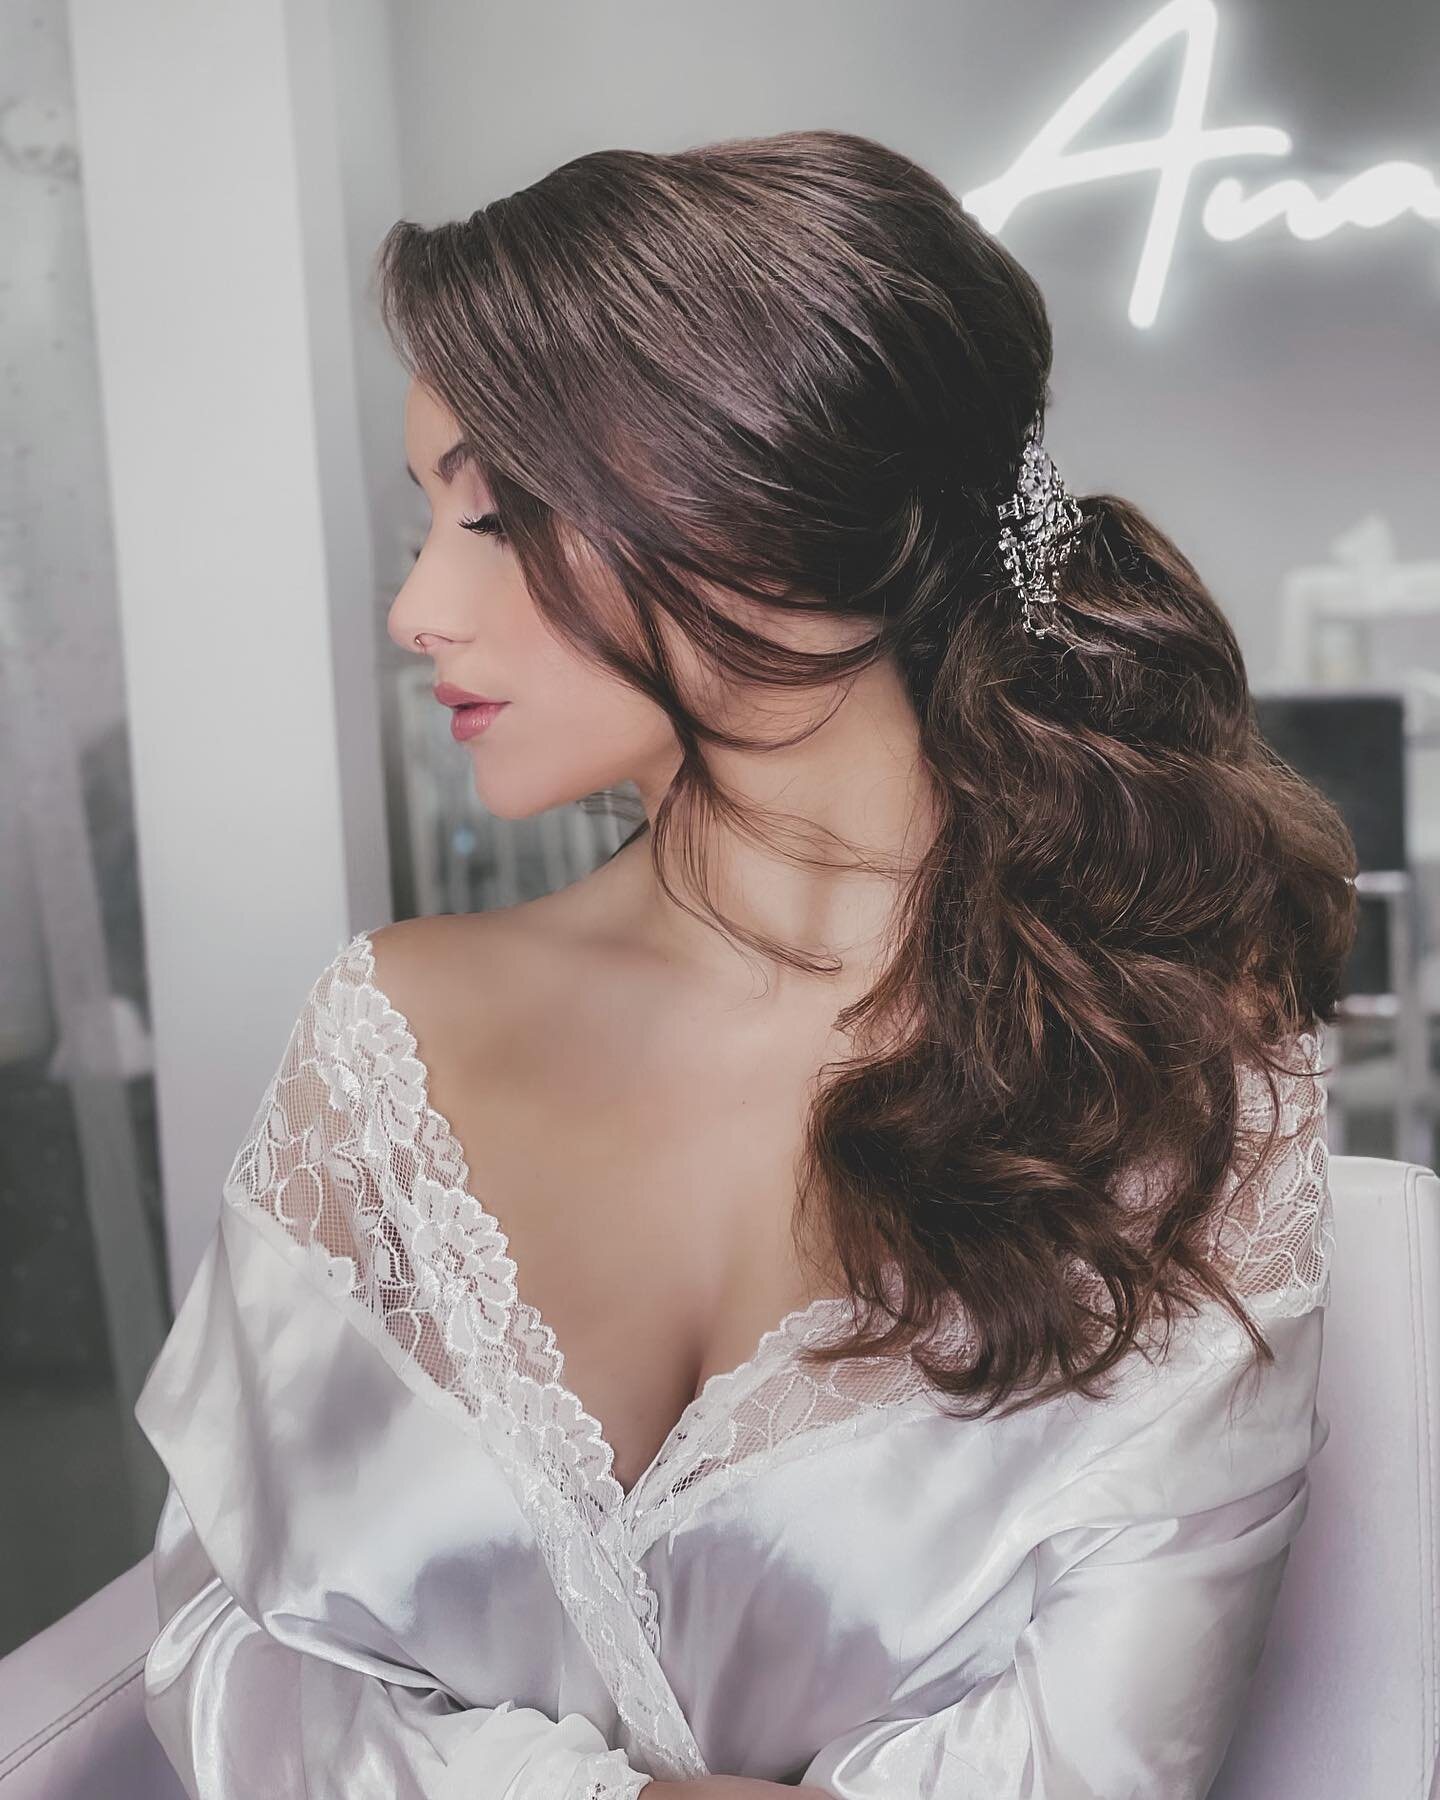 Love a good ponytail 🤍
Thank you @anahellabridal for all of your amazing classes! I have learned so much in such a short amount of time thanks to you❣️
✨C O N T A C T✨
Link in Bio to book
For inquiries &amp; all other info contact 
💌Beautycafenj@gm